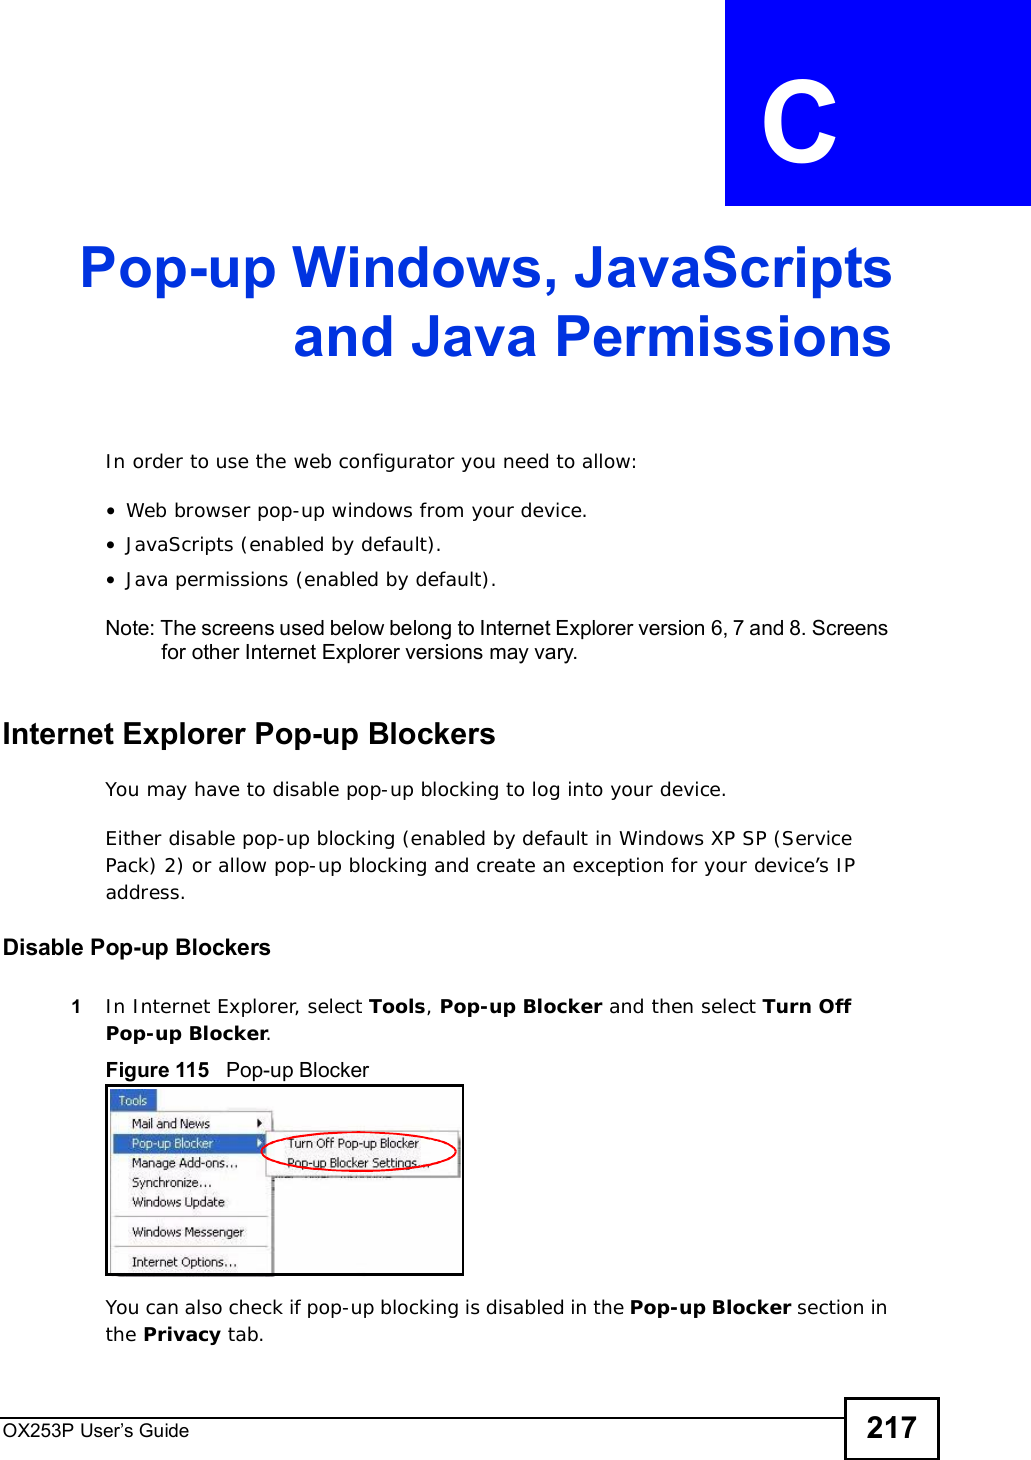 OX253P User’s Guide 217APPENDIX  C Pop-up Windows, JavaScriptsand Java PermissionsIn order to use the web configurator you need to allow:•Web browser pop-up windows from your device.•JavaScripts (enabled by default).•Java permissions (enabled by default).Note: The screens used below belong to Internet Explorer version 6, 7 and 8. Screens for other Internet Explorer versions may vary.Internet Explorer Pop-up BlockersYou may have to disable pop-up blocking to log into your device. Either disable pop-up blocking (enabled by default in Windows XP SP (Service Pack) 2) or allow pop-up blocking and create an exception for your device’s IP address.Disable Pop-up Blockers1In Internet Explorer, select Tools,Pop-up Blocker and then select Turn Off Pop-up Blocker.Figure 115   Pop-up BlockerYou can also check if pop-up blocking is disabled in the Pop-up Blocker section in the Privacy tab. 